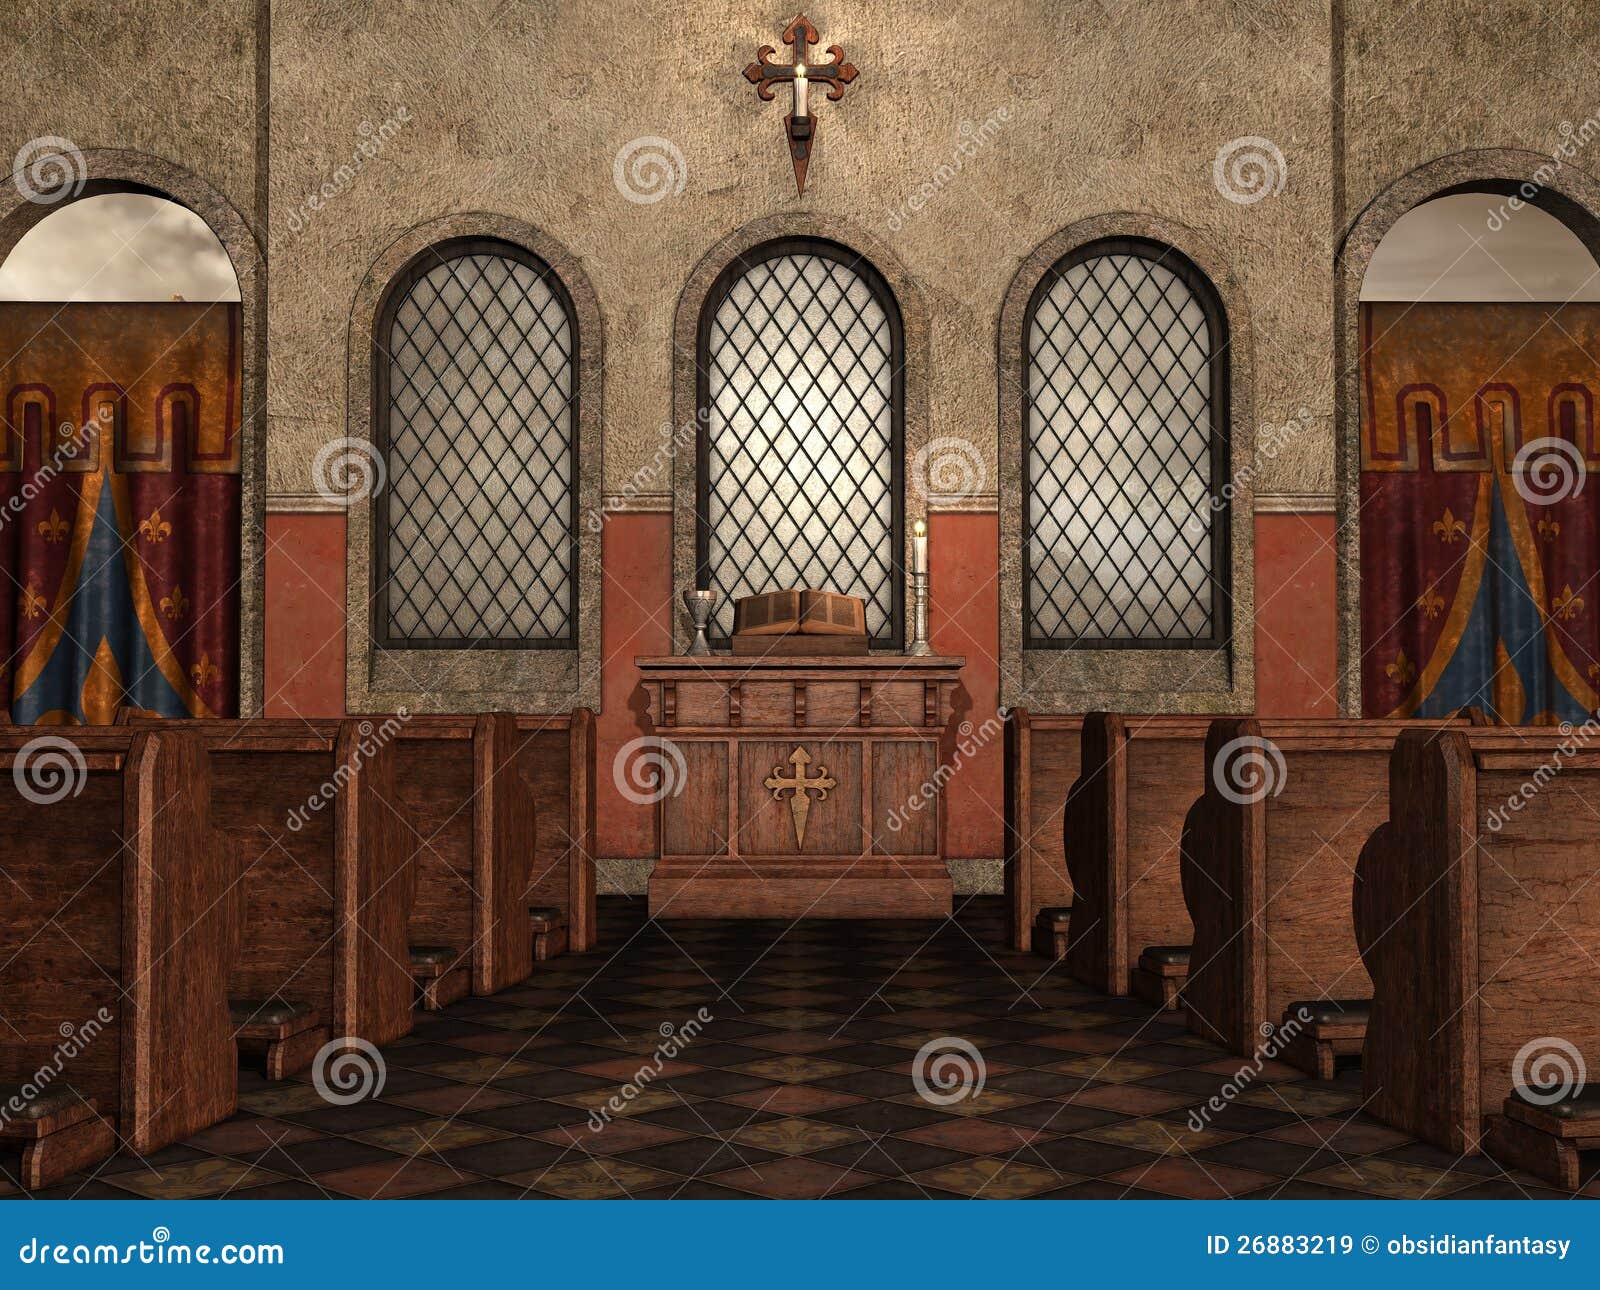 Medieval Church Interior Royalty Free Stock Images - Image: 26883219